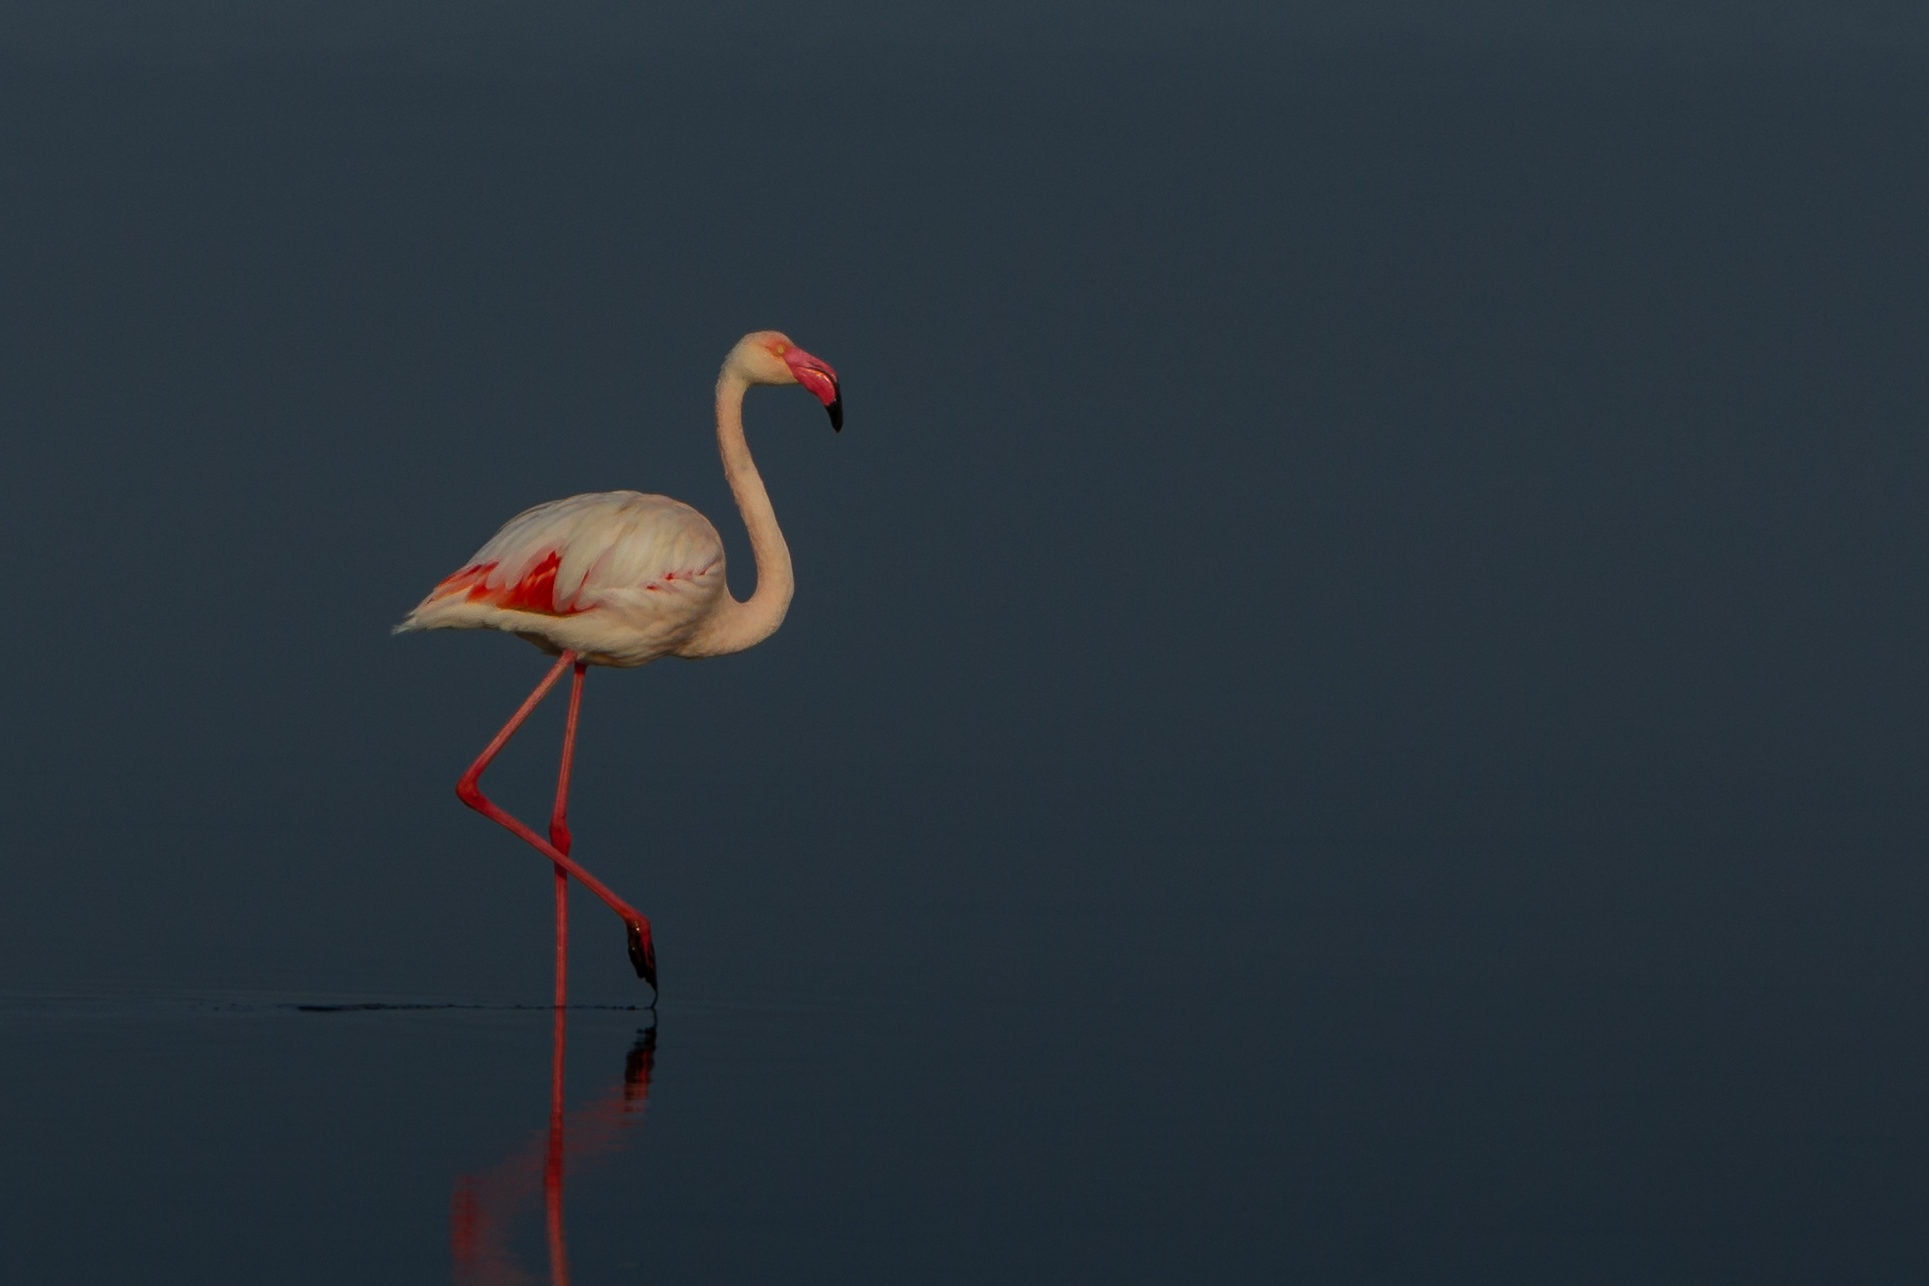 Greater Flamingo feeding in the Camargue, France
